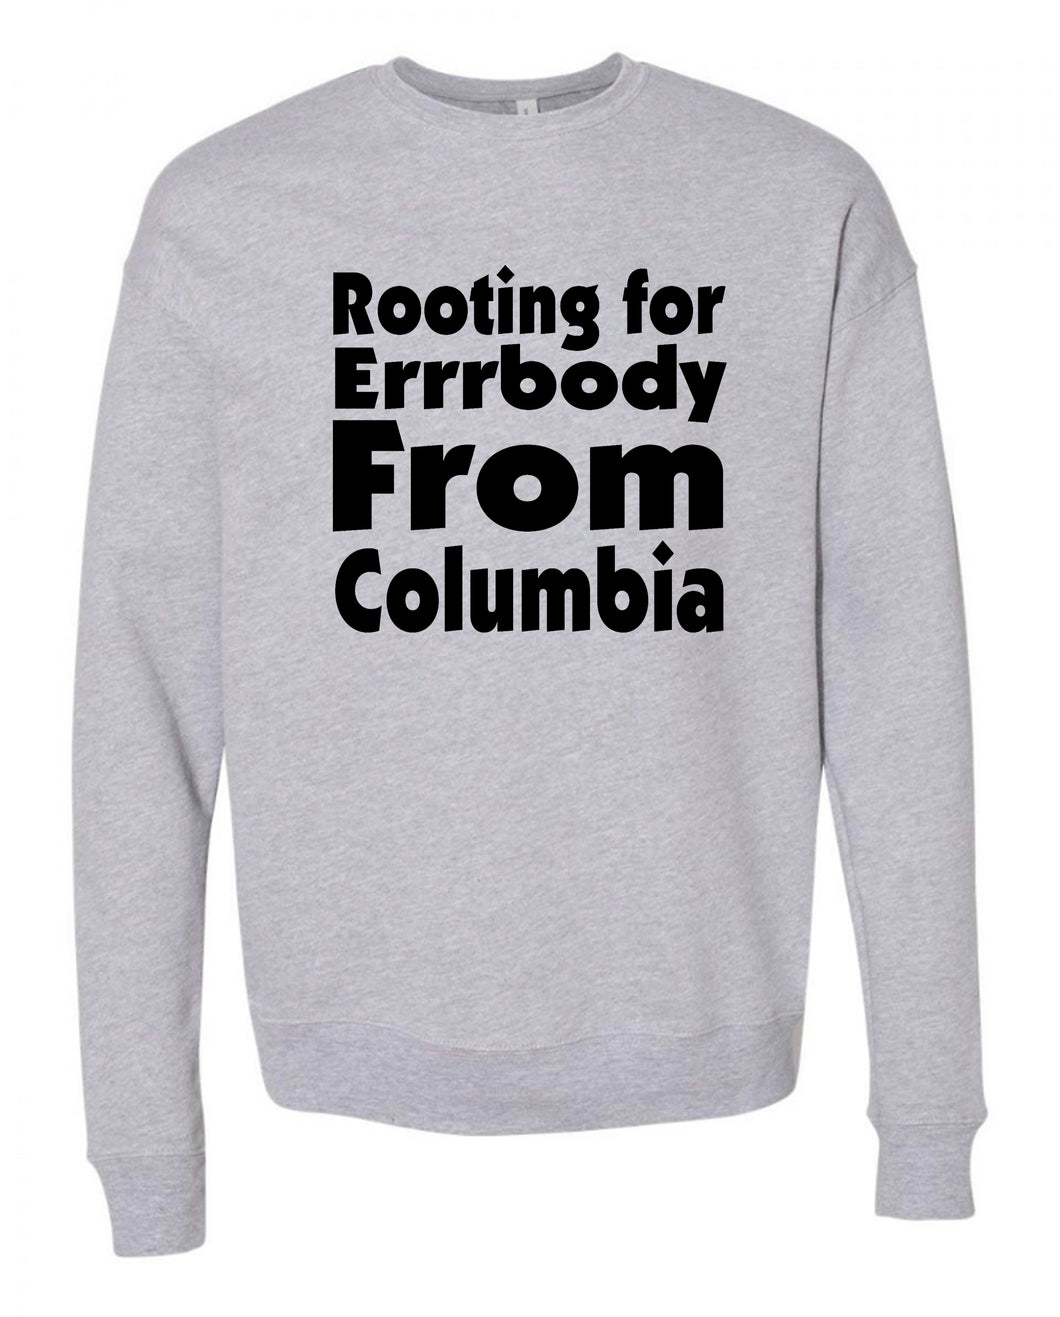 Rooting For Columbia Crewneck